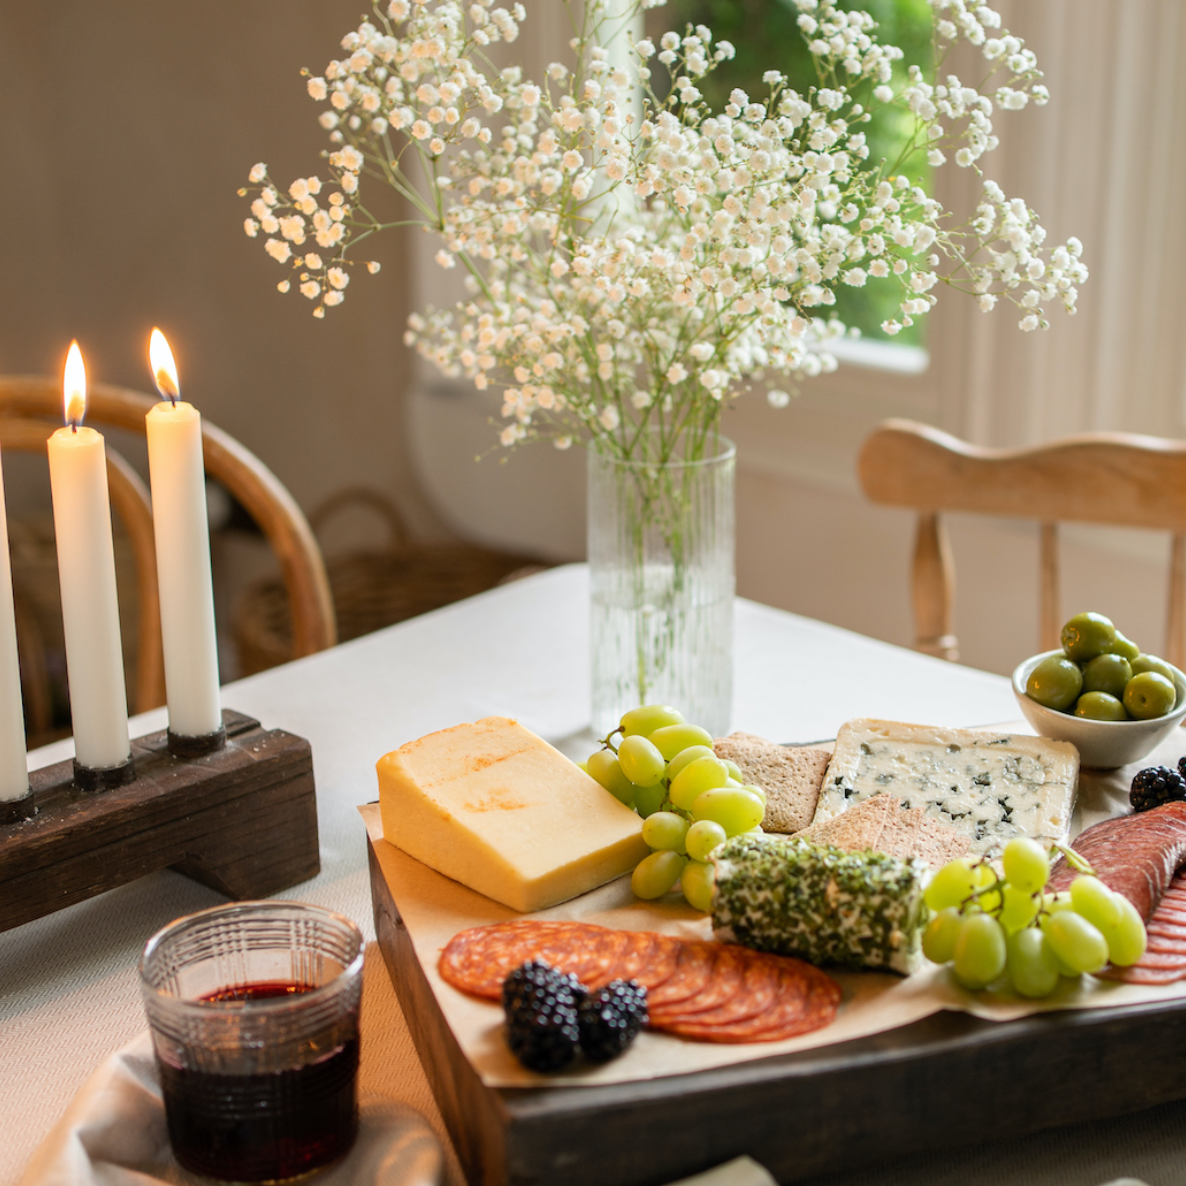 A dinner table with a cheese and fruit plater, flowers and some lit candles.